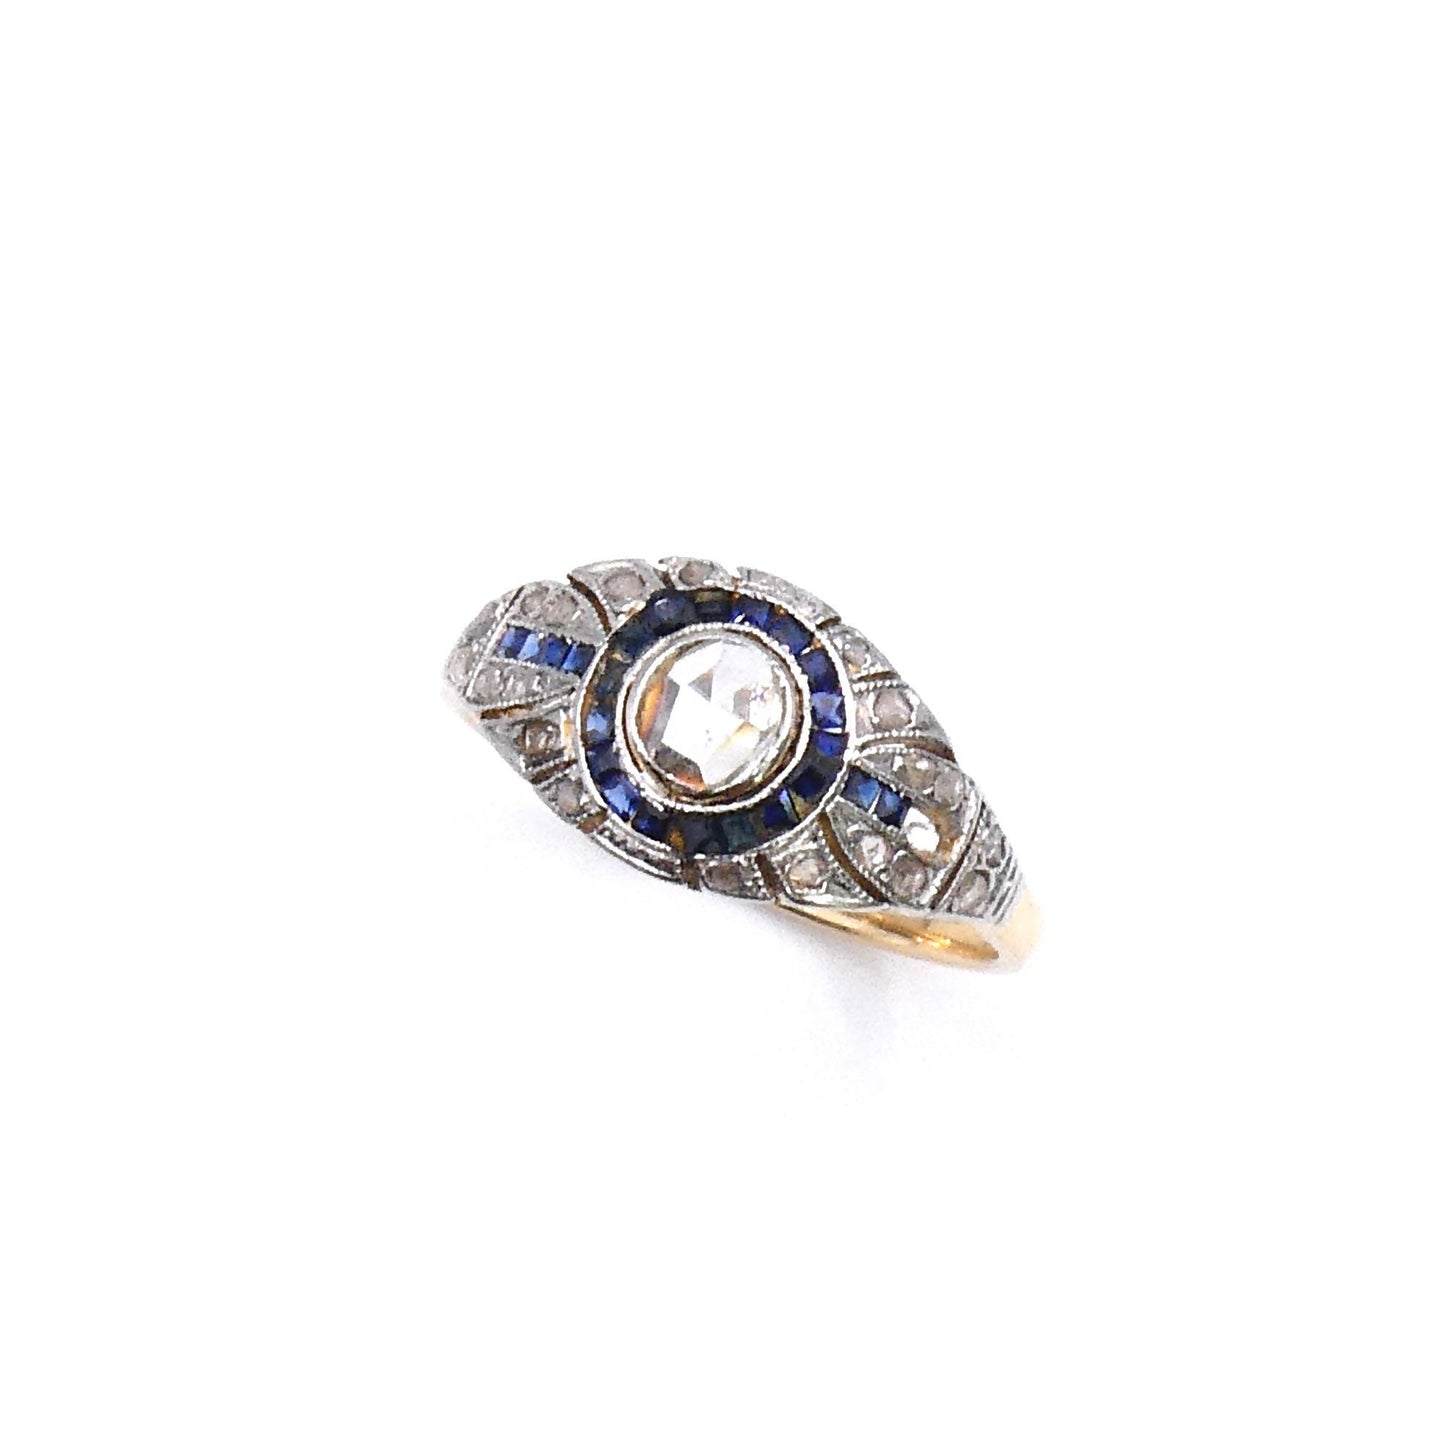 Antique sapphire ring with a rose cut diamond set in 18kt gold, Art Deco sapphire diamond ring.